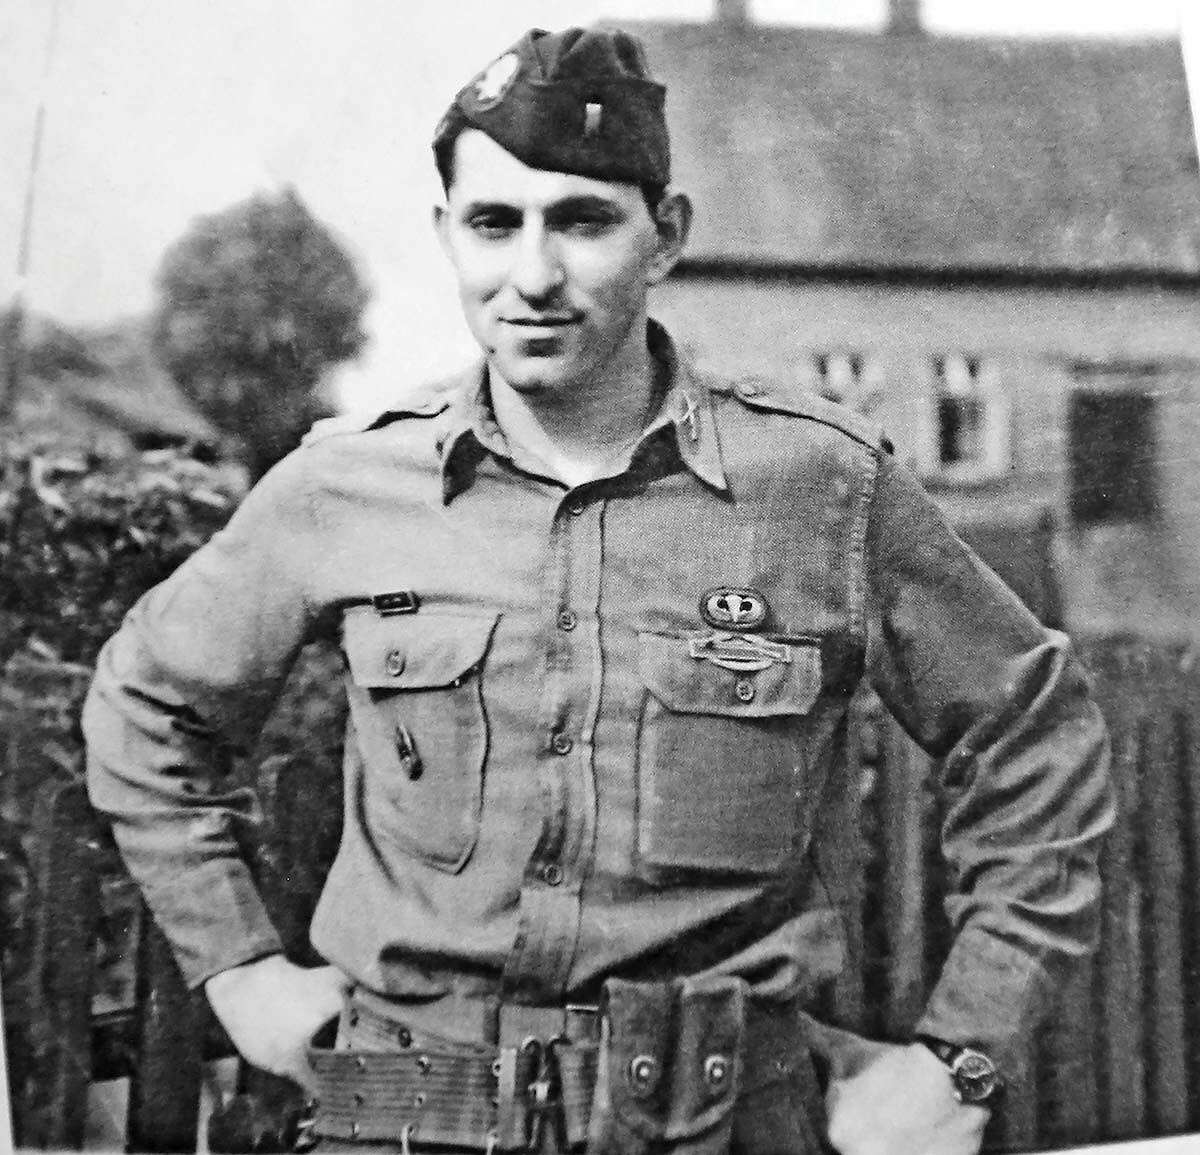 This photo of Katz was taken on May 2, 1945, in Germany when he, as an infantry officer, “had just been involved in the liberation of the Wobbelin concentration camp.”